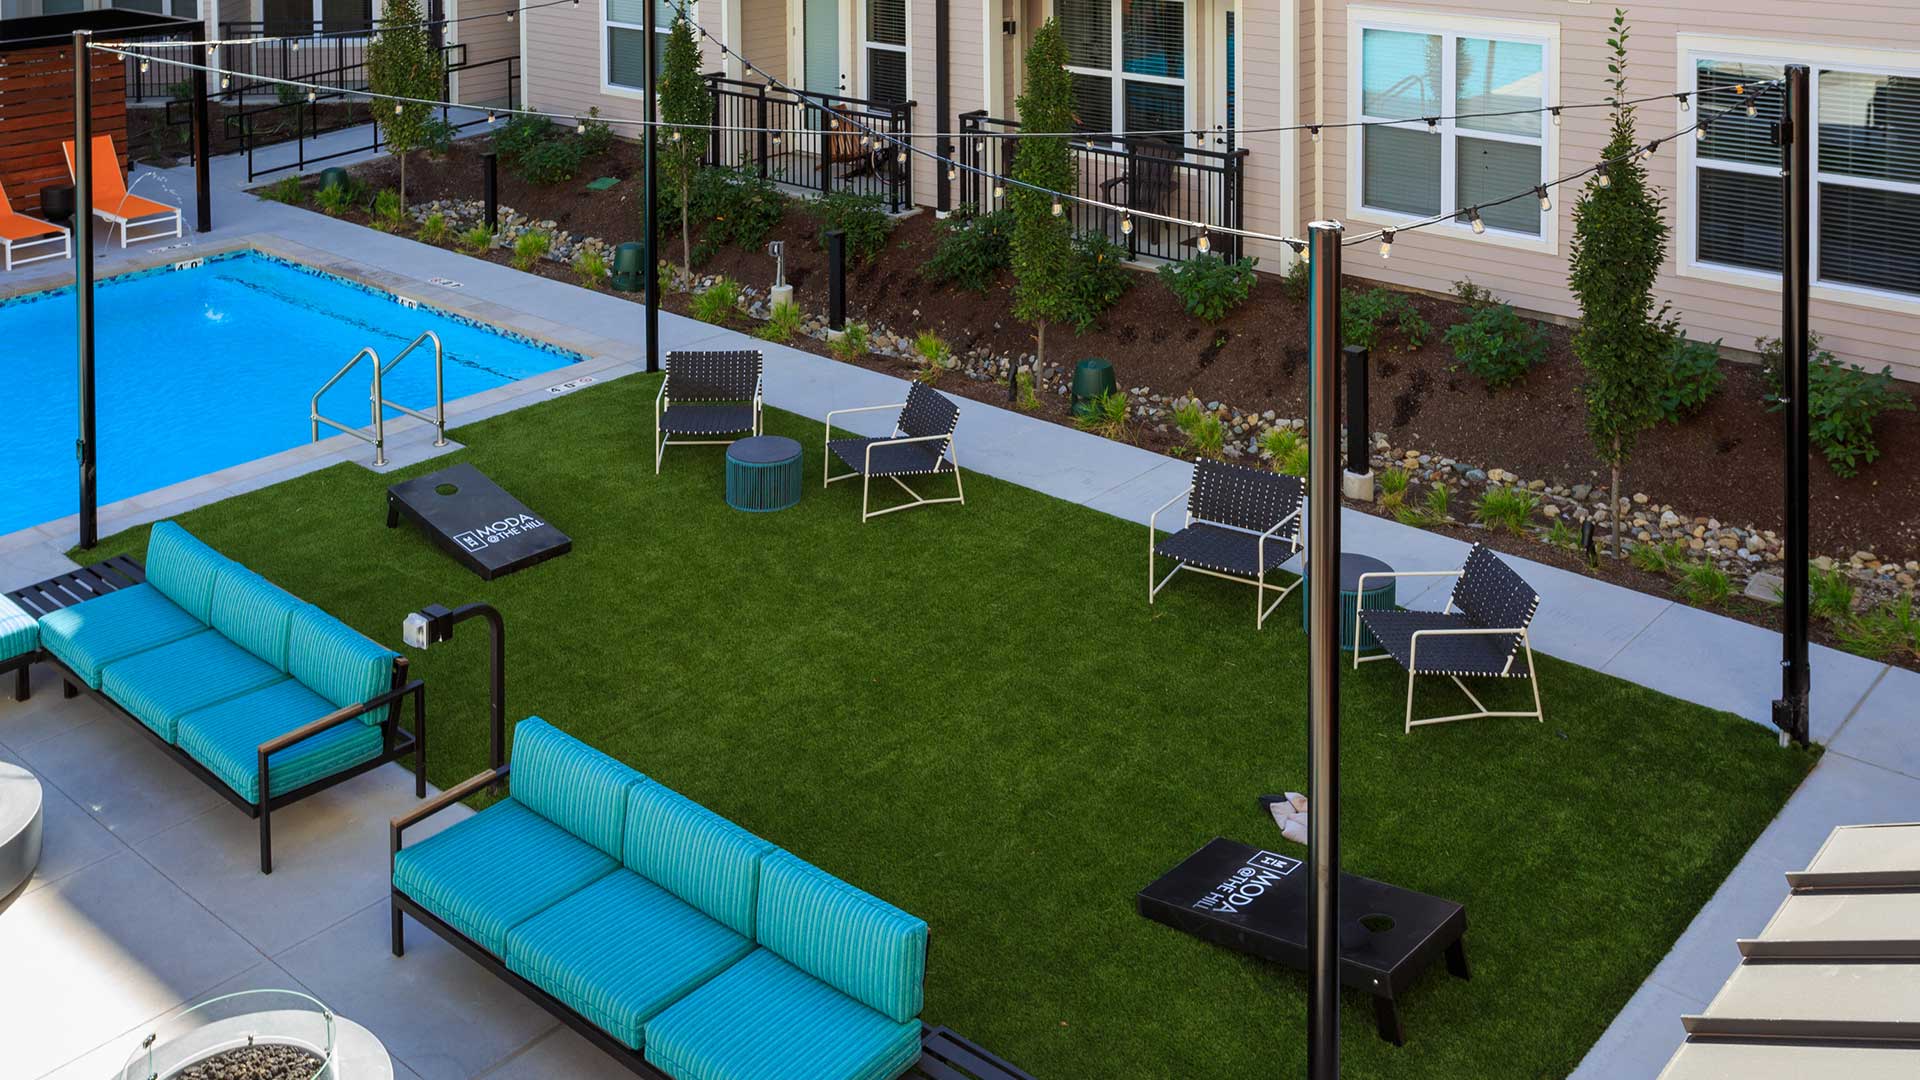 Looking at the outdoor gaming area from above. There is green turf with a cornhole set. There is seating on both sides. The pool is just off to the left.